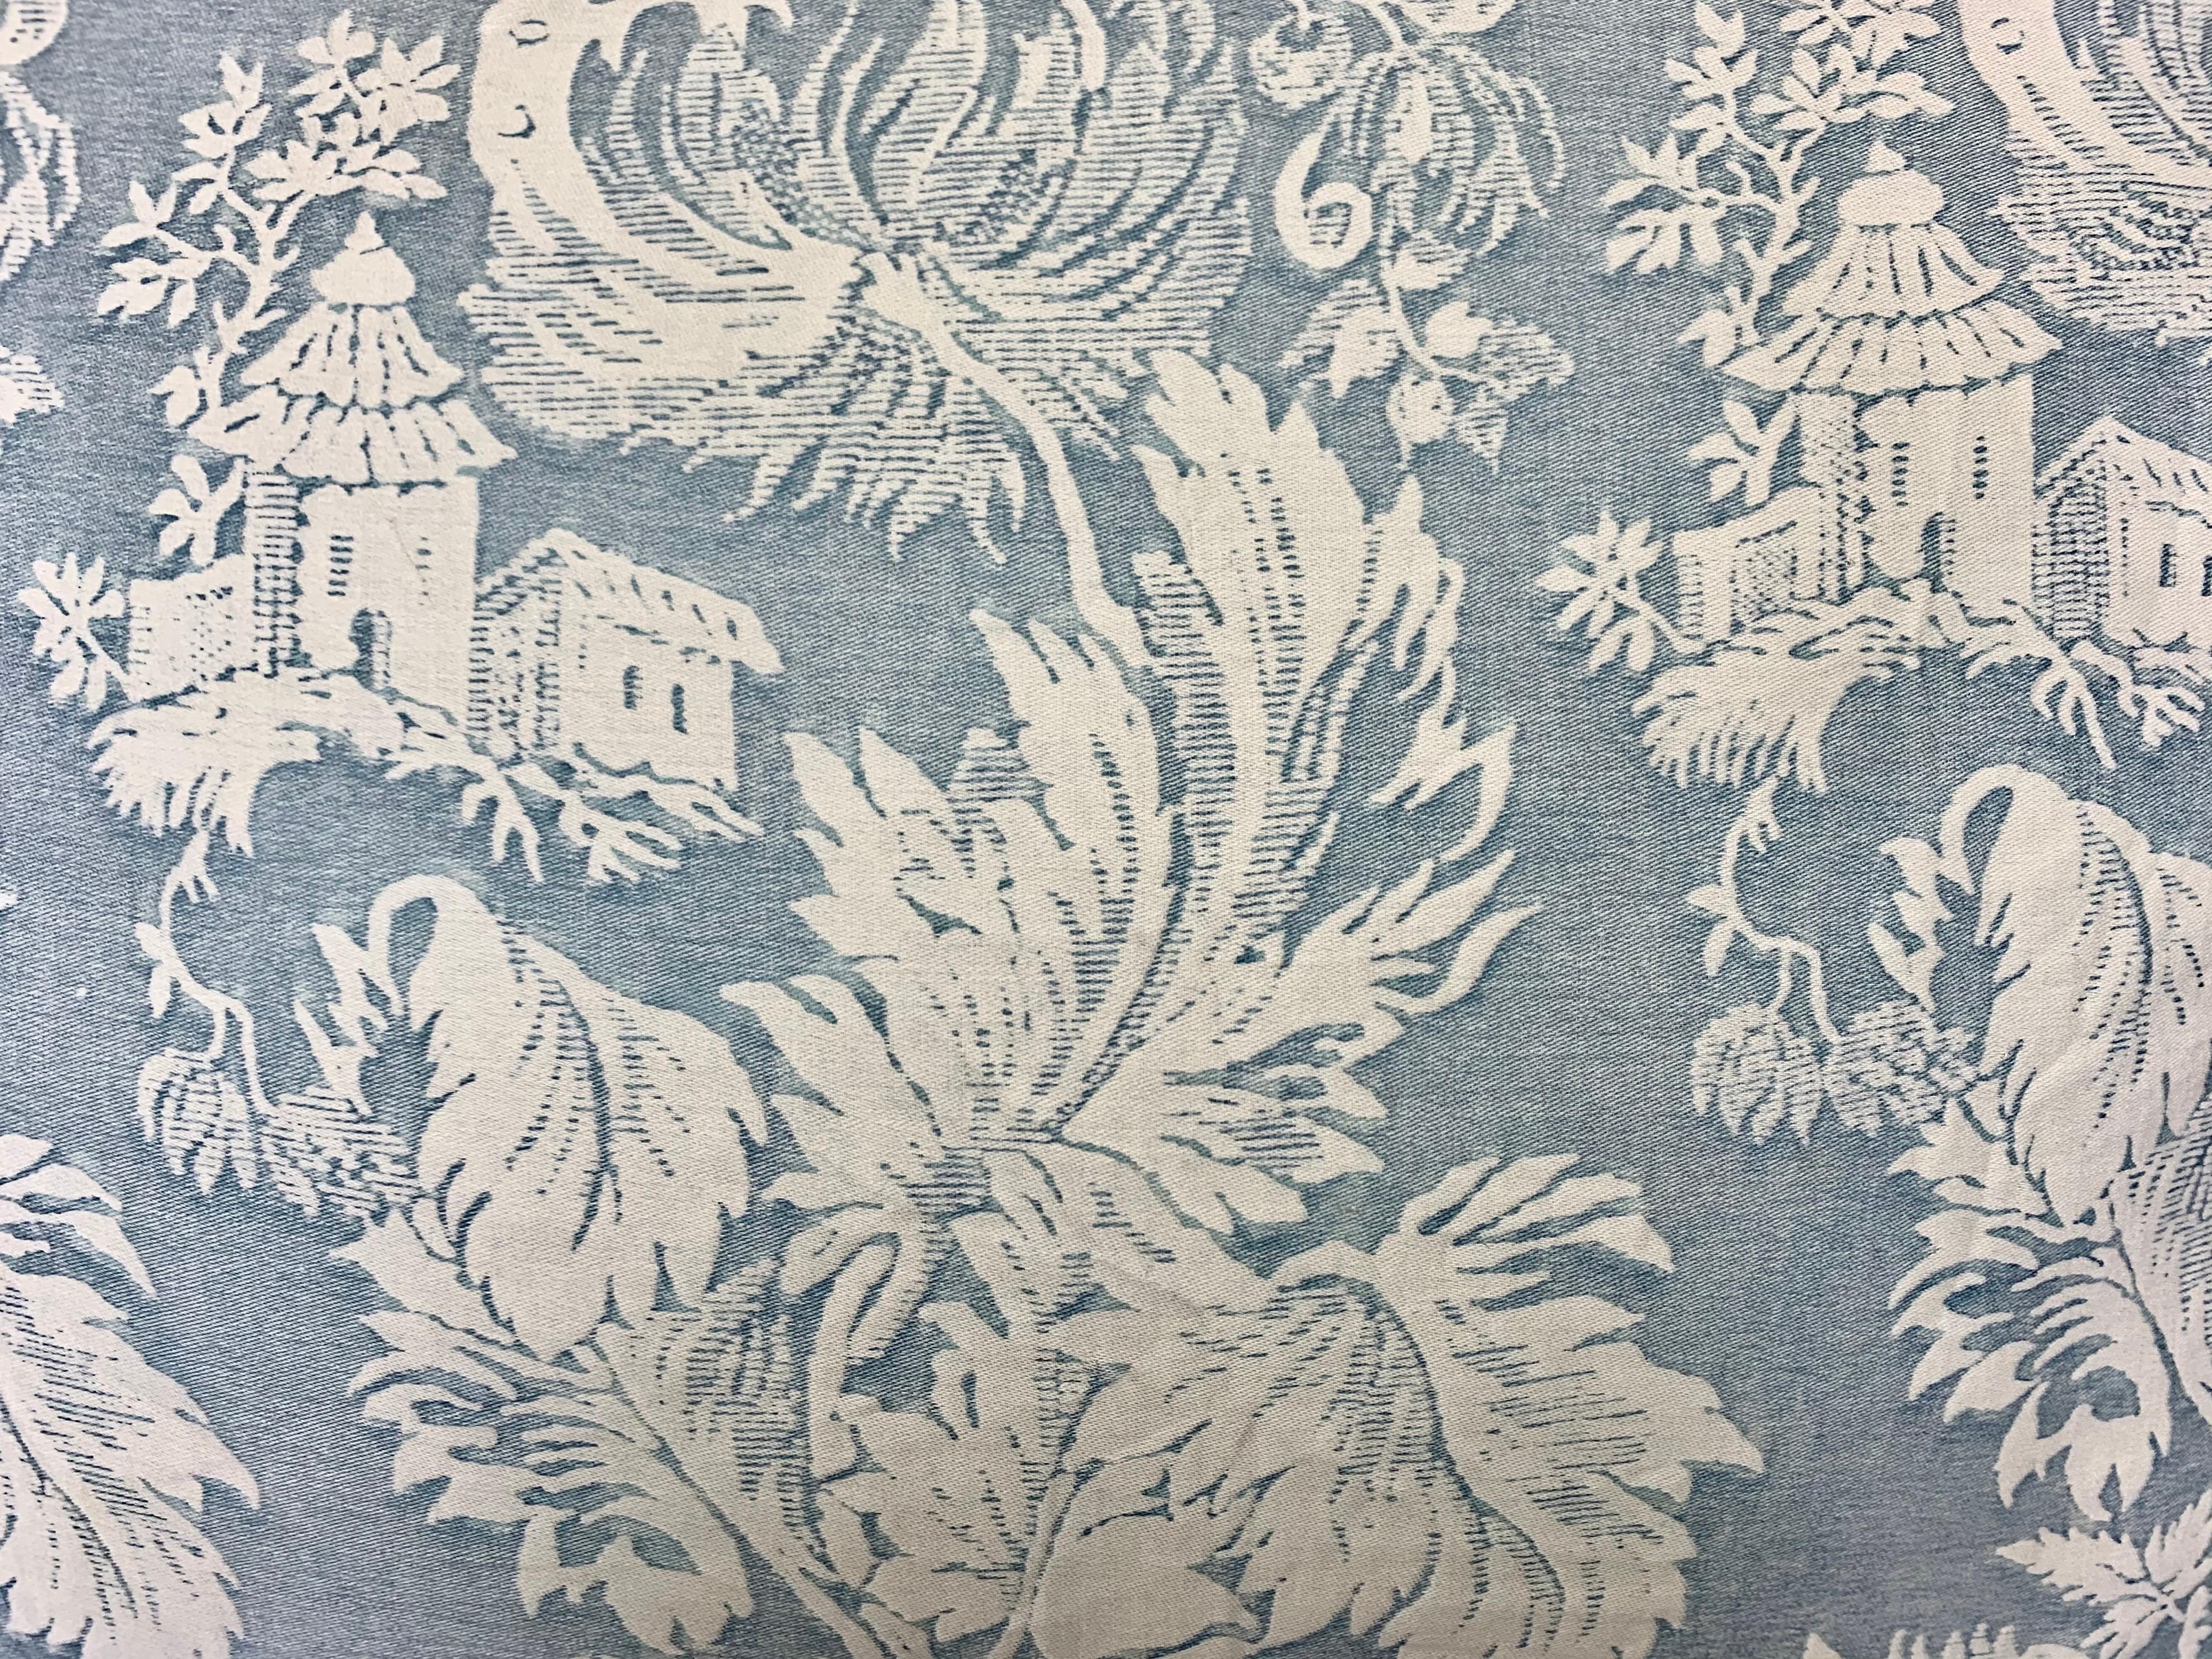 Cotton Pair of Blue & White Chinoiserie Patterned Authentic Fortuny Pillows